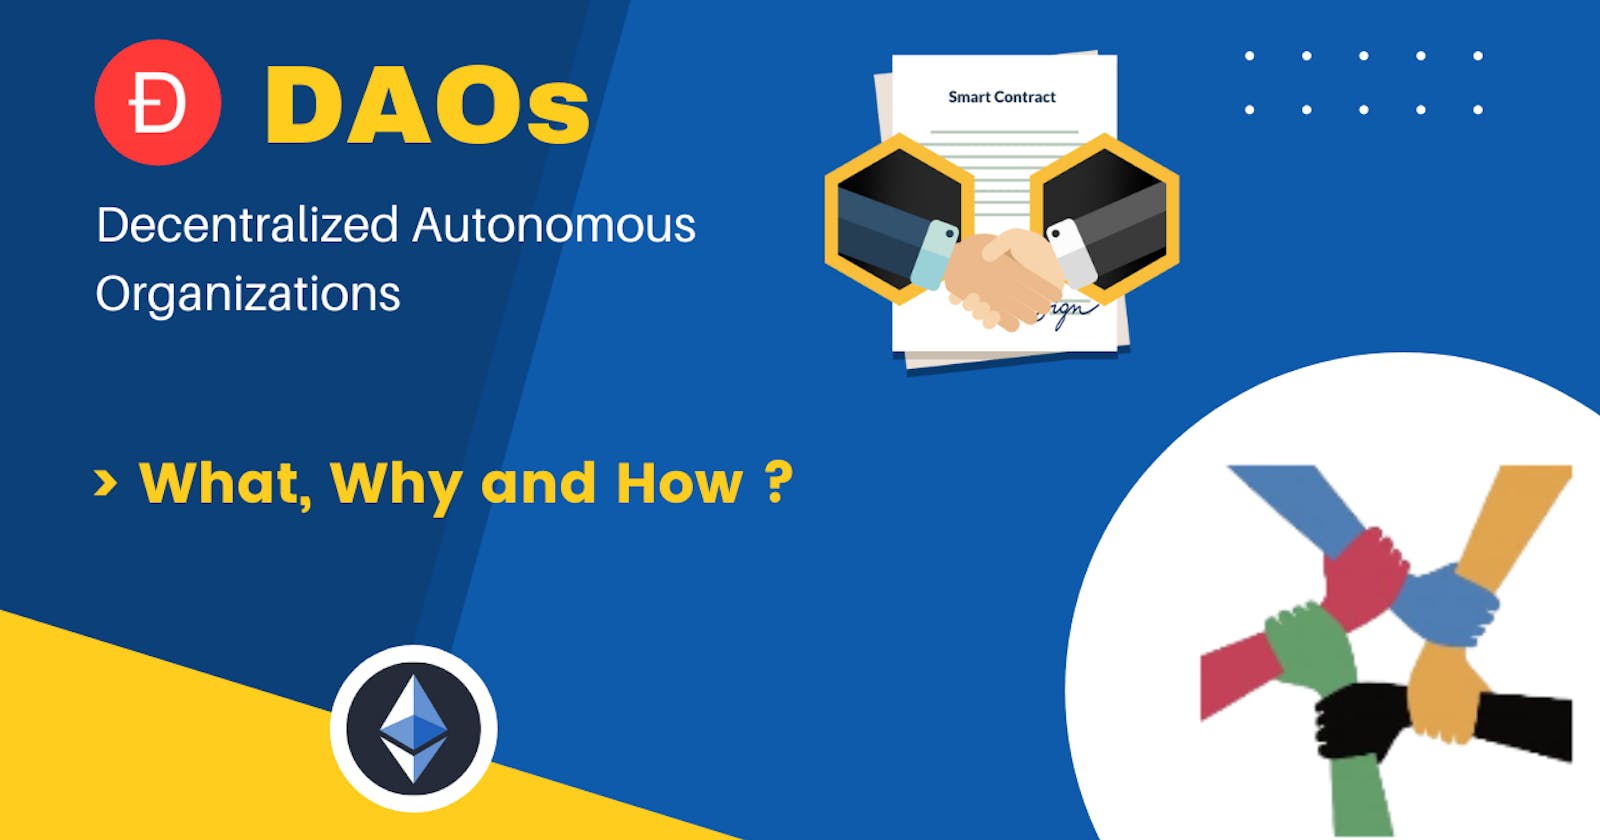 DAOs - Playing an important role in Web3